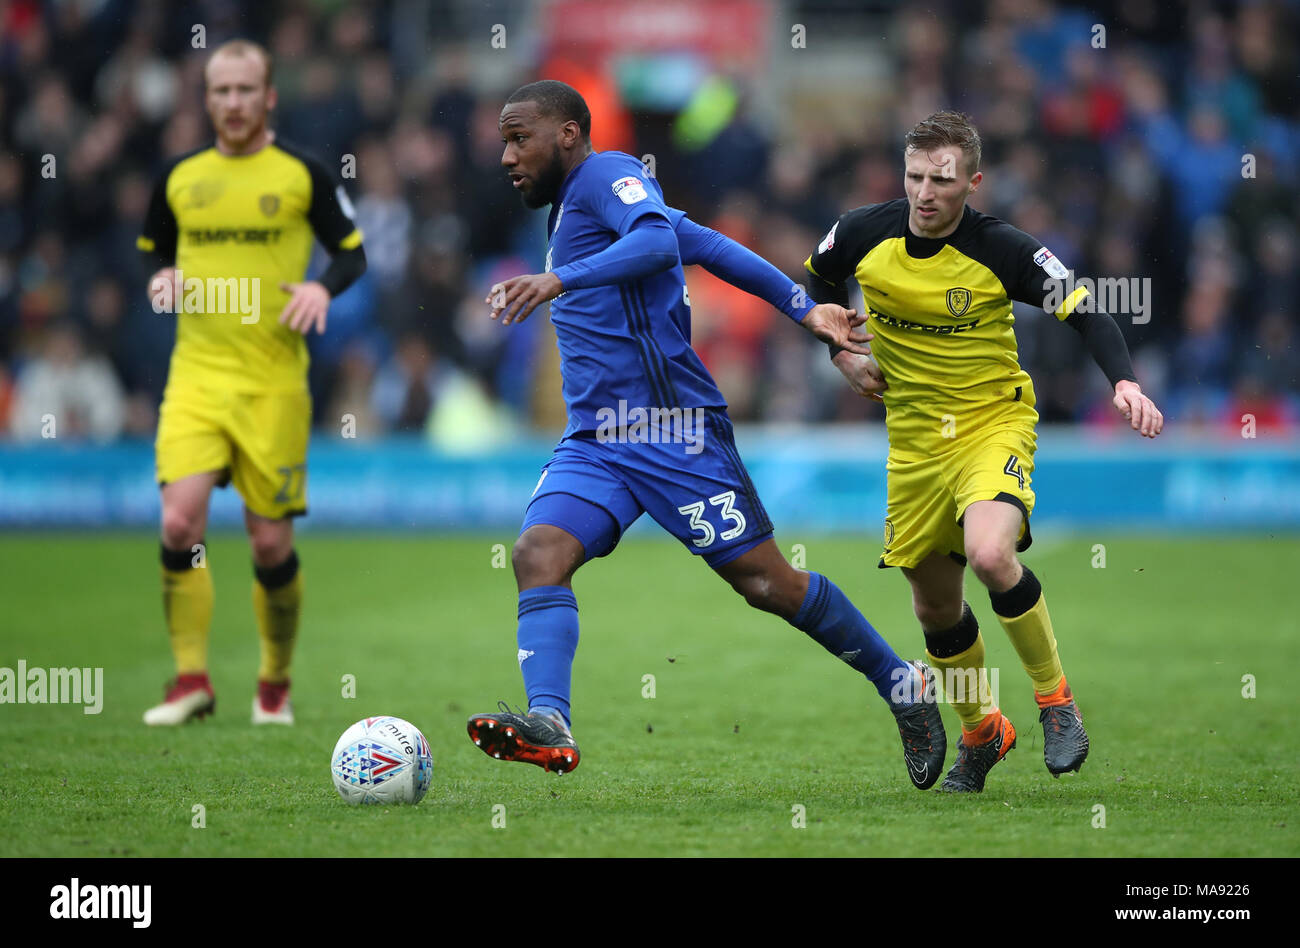 Cardiff City's Junior Hoilett and Burton Albion's Jamie Allen battle for the ball during the Sky Bet Championship match at the Cardiff City Stadium. Stock Photo